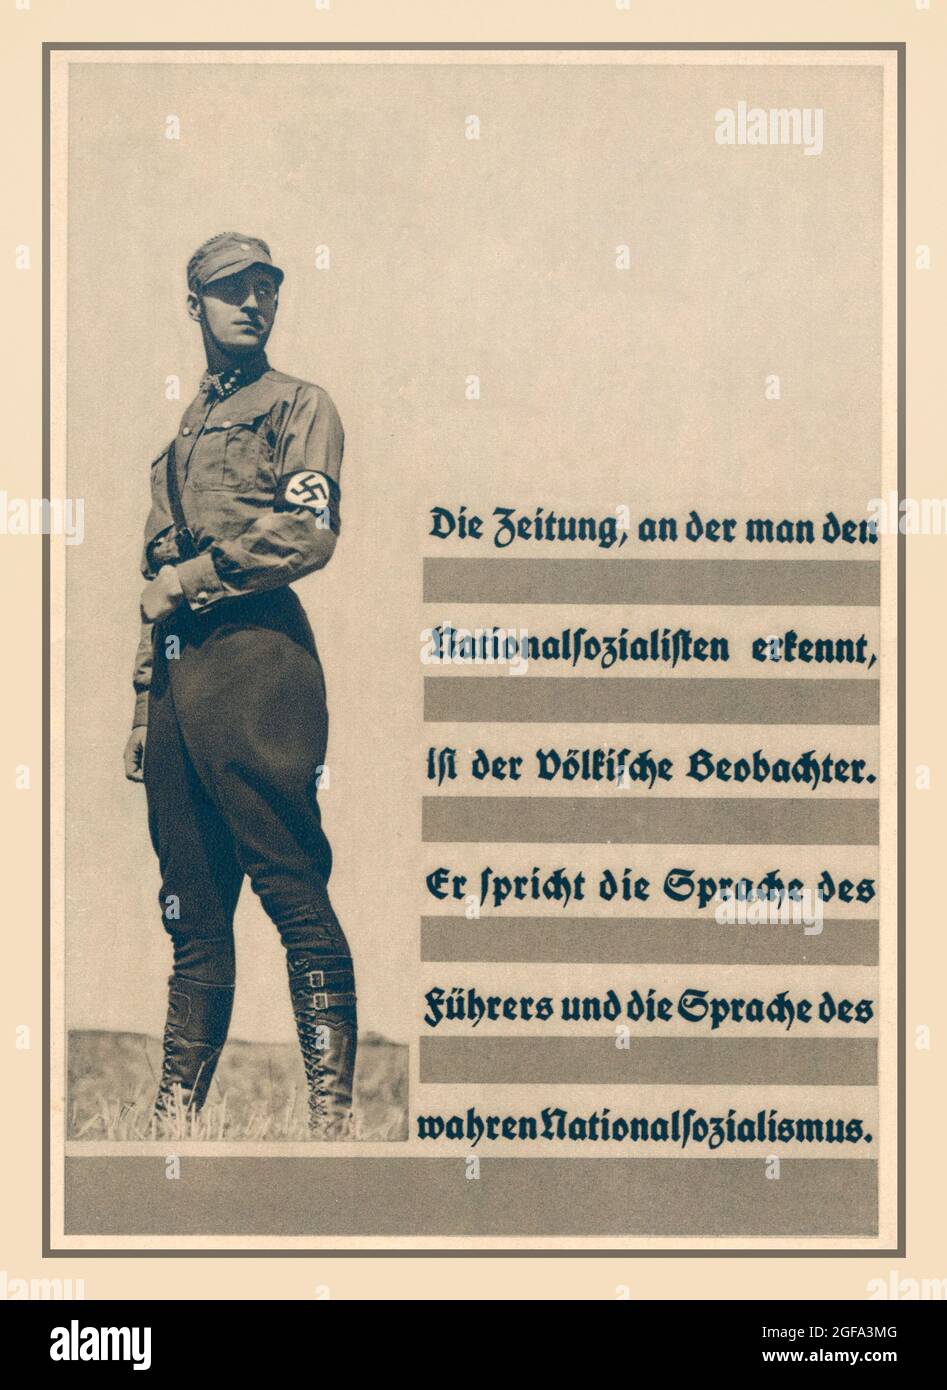 NSDAP Press Archive Propaganda at 13th German Radio Exhibition Berlin 1936'  Photo 'Hitlers NSDAP Nazi military soldier next to NSDAP propaganda advertising text for the newspaper Völkischer Beobachter' Nazi Propaganda ‘ The Newspaper where you will hear the voice of The National Socialists’. (NSDAP) Stock Photo